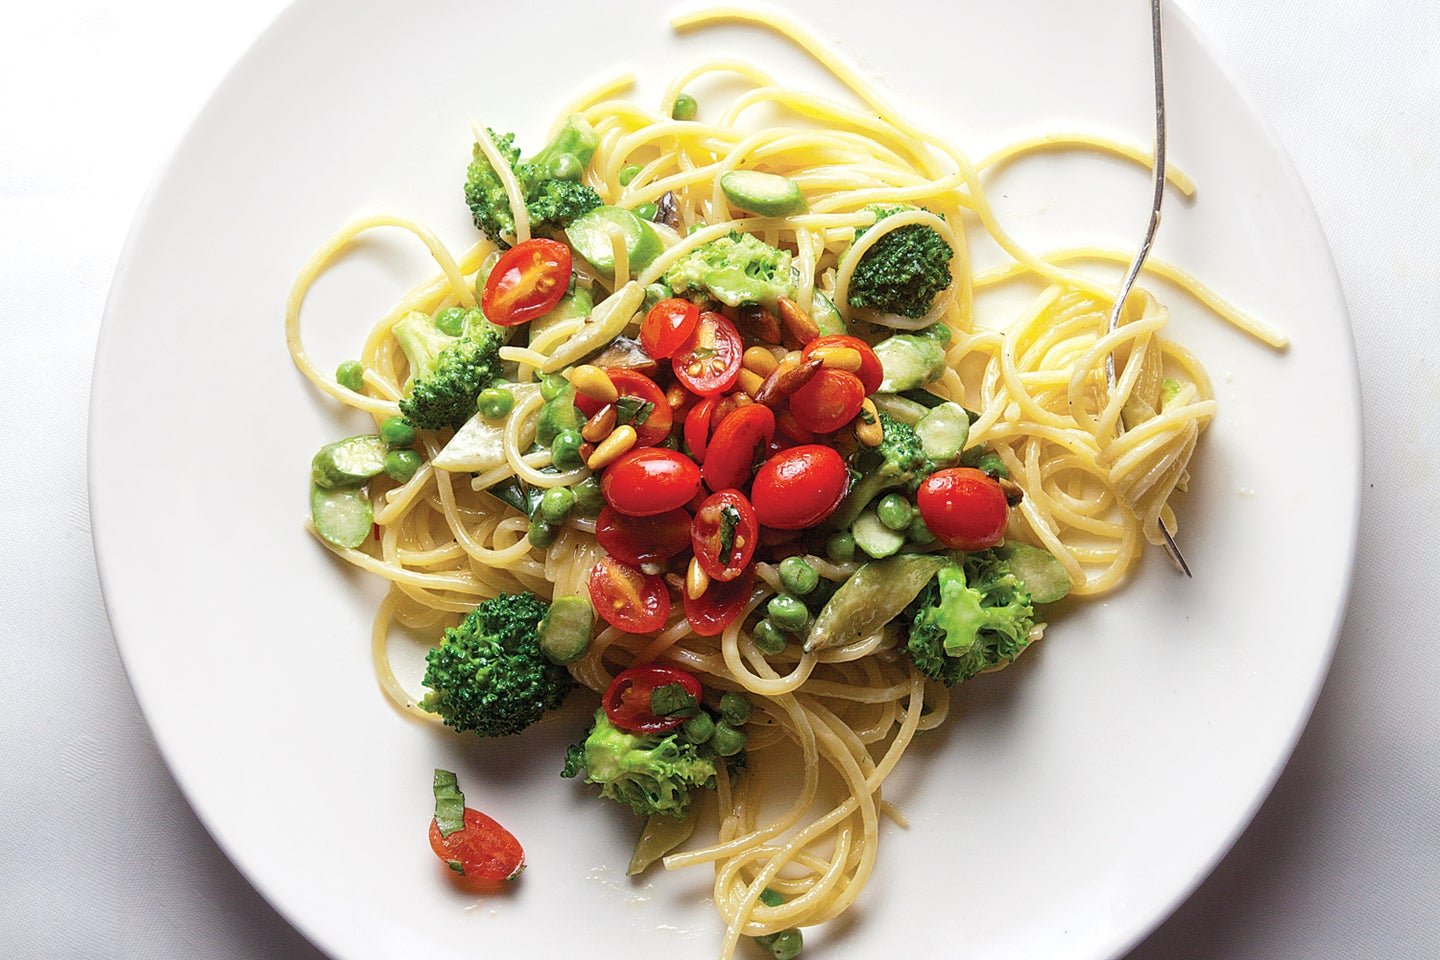 17 Fancy-Seeming Vegetarian Dishes That Come Together in 30 Minutes (or Less)